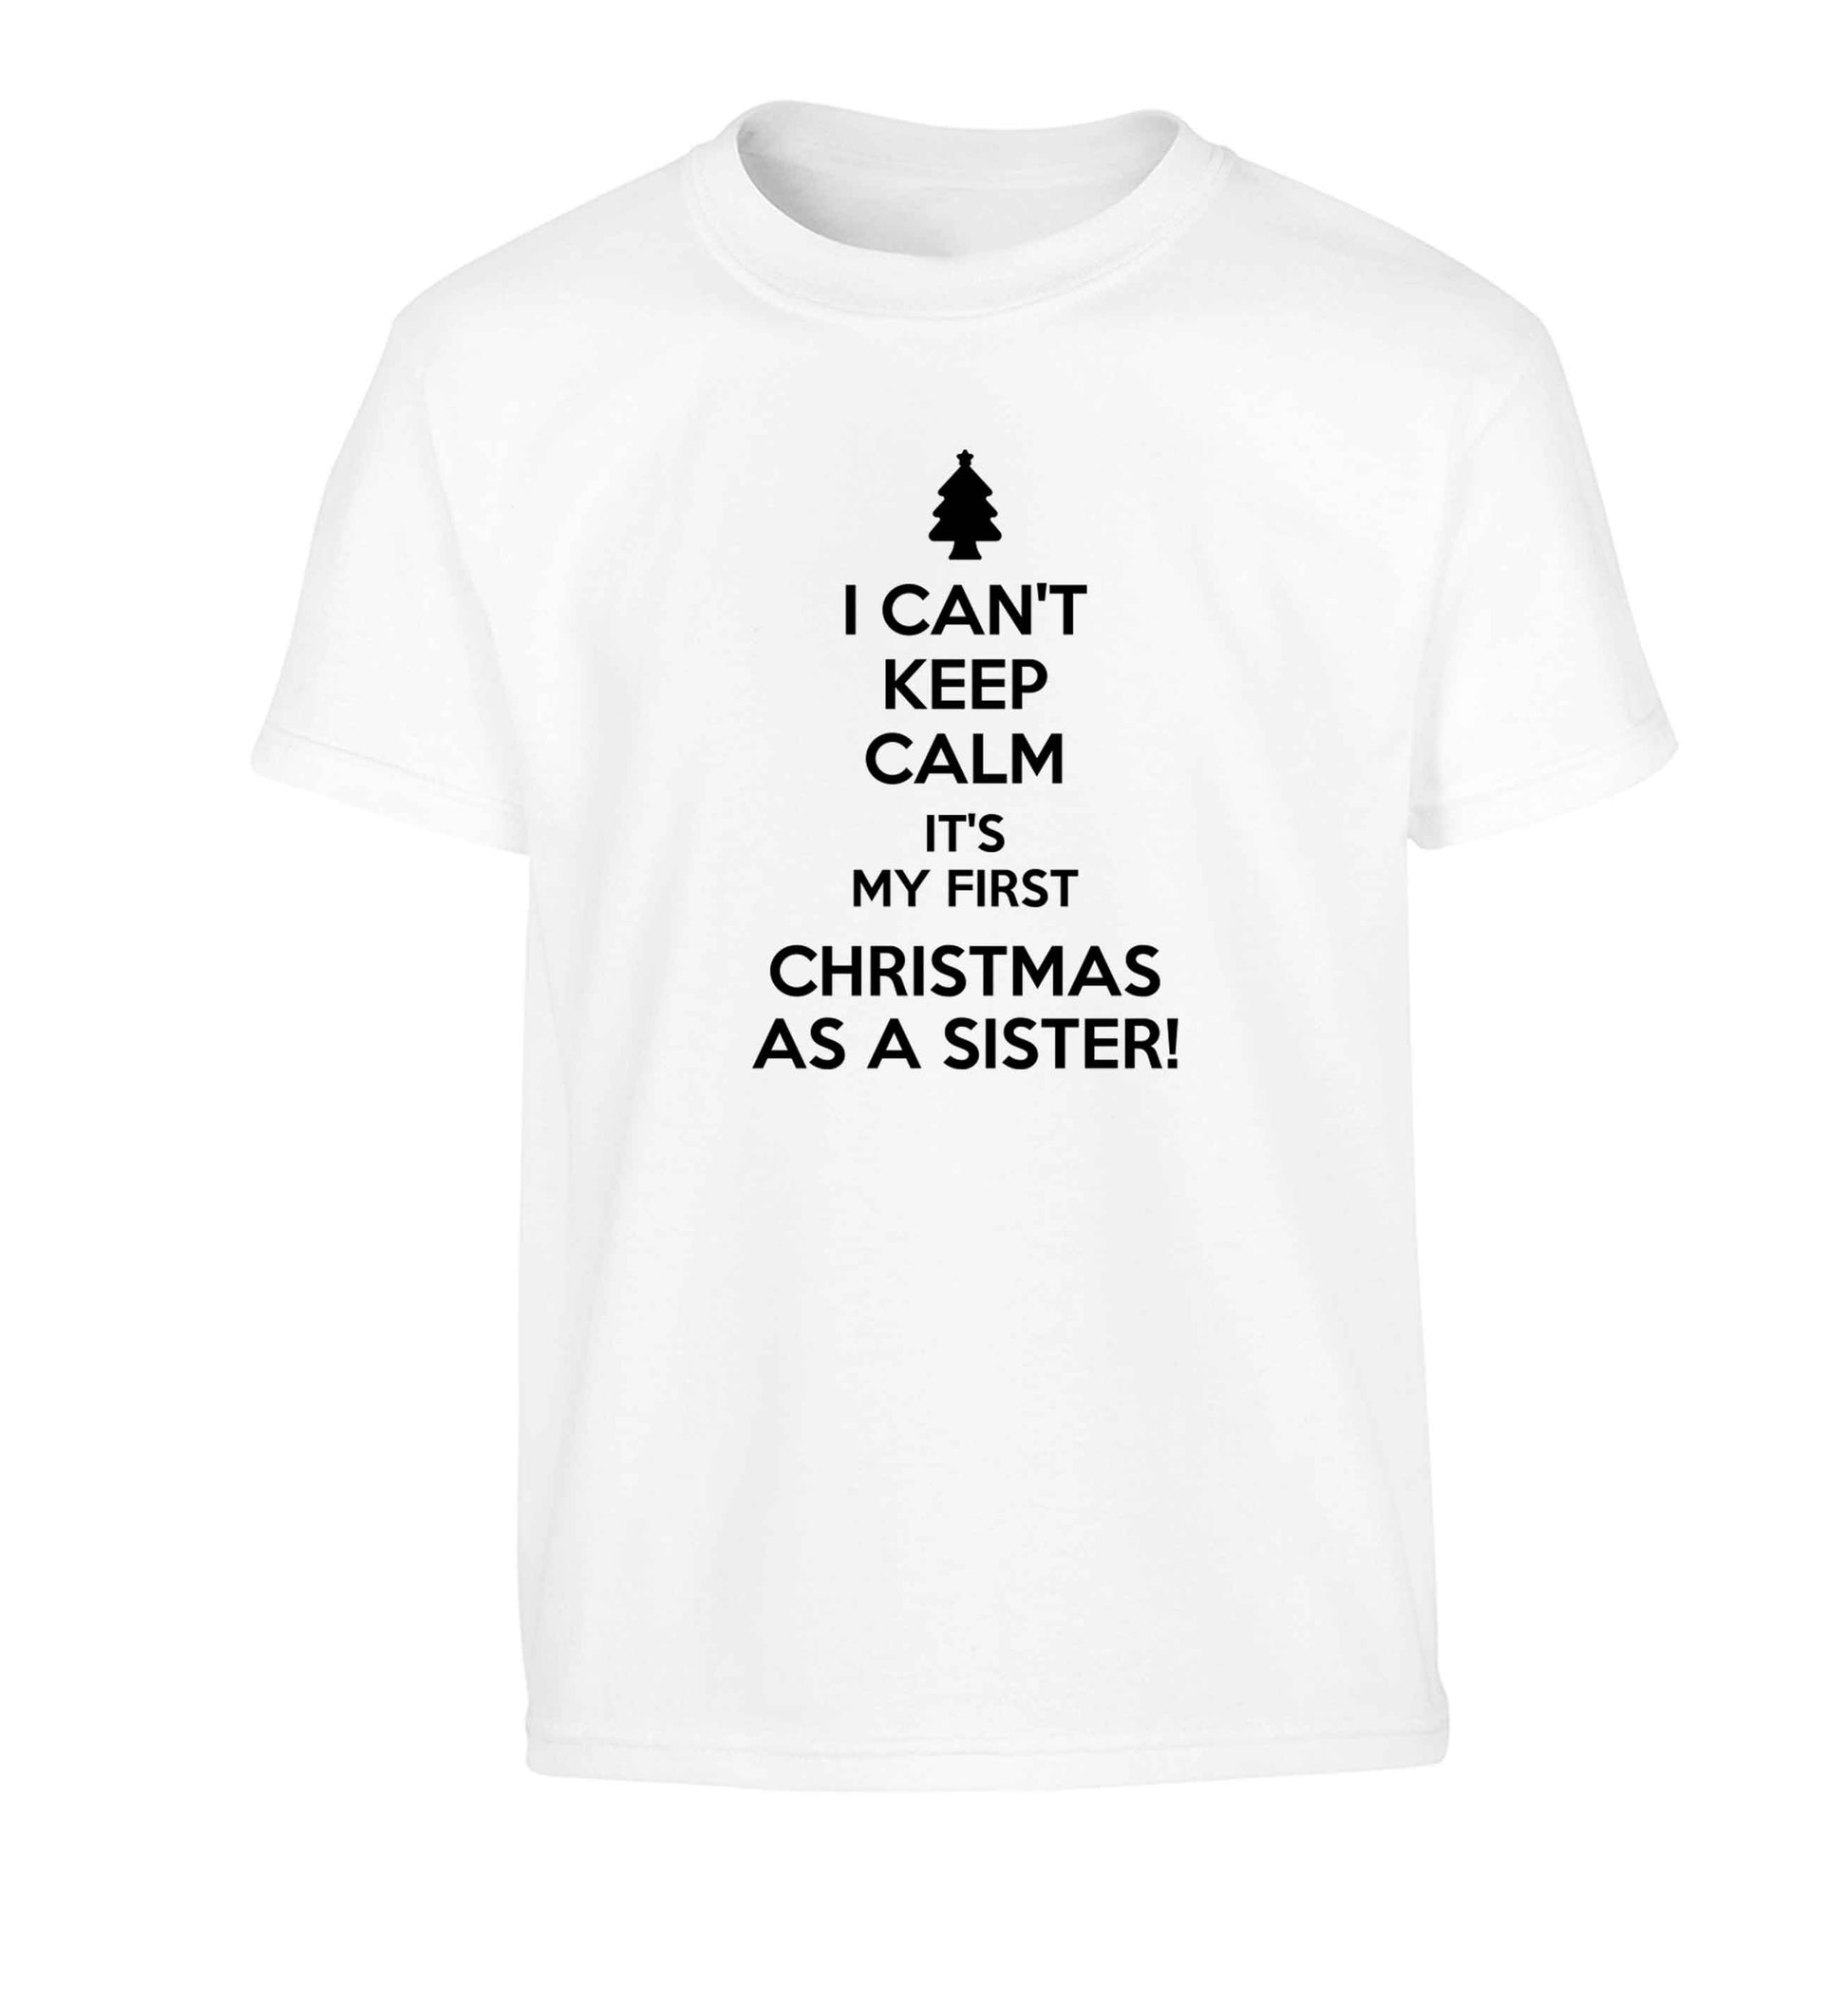 I can't keep calm it's my first Christmas as a sister! Children's white Tshirt 12-13 Years